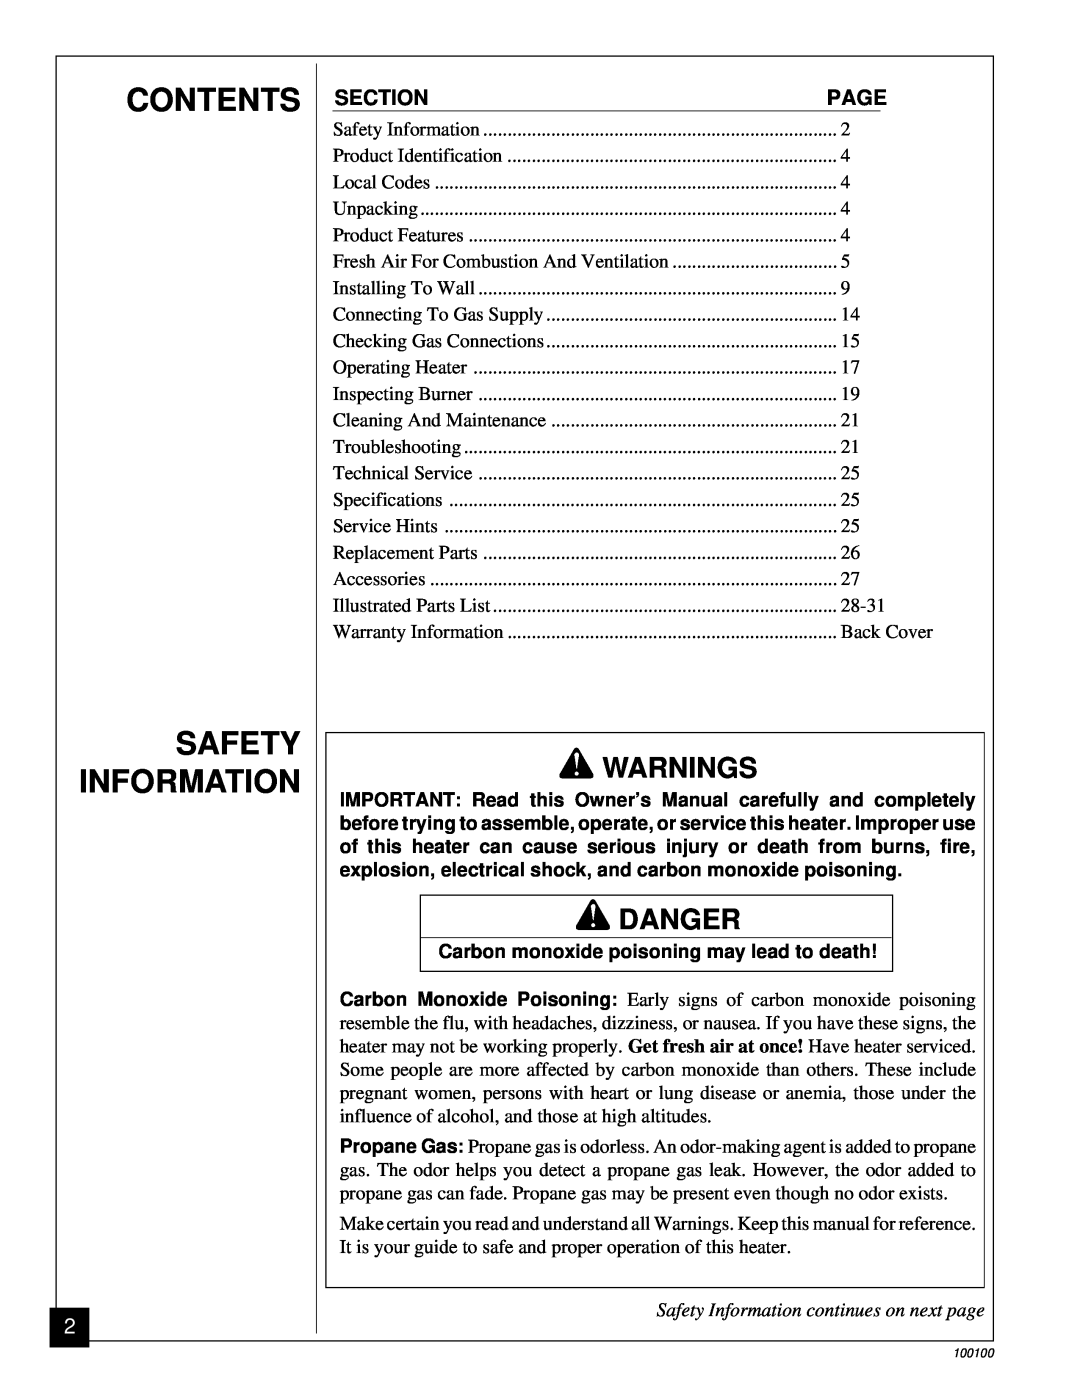 Vanguard Heating VP2000BB, VGP30B Contents Safety Information, Warnings, Danger, Safety Information continues on next page 